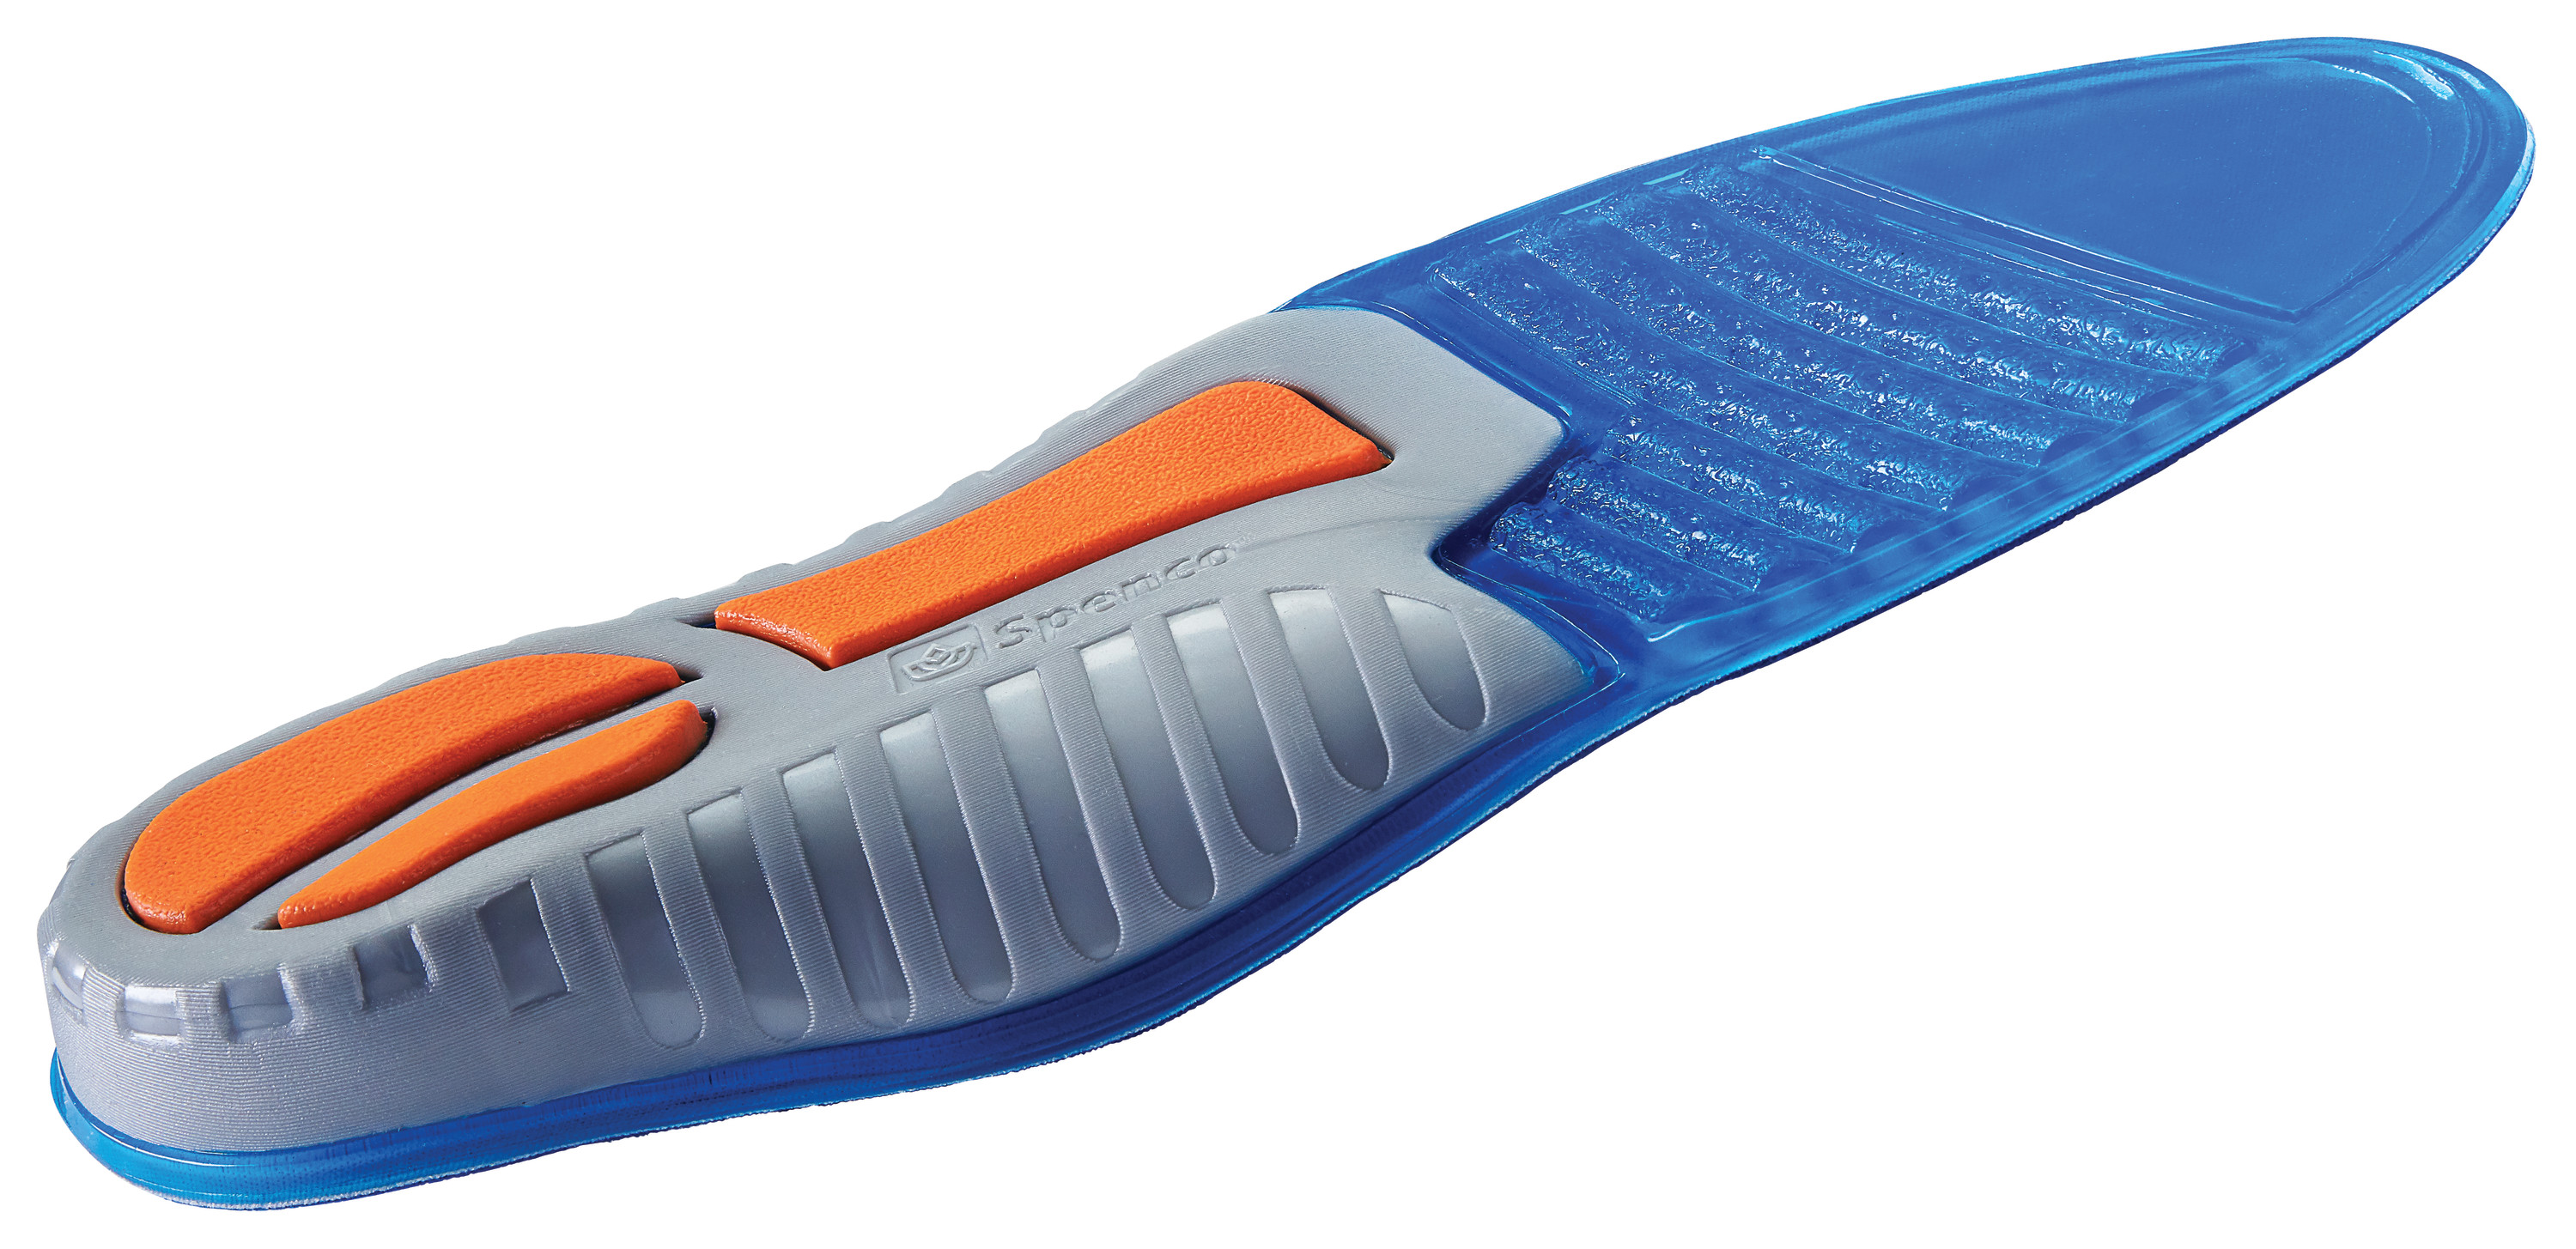 Spenco Total Support Gel Insole - image 2 of 3